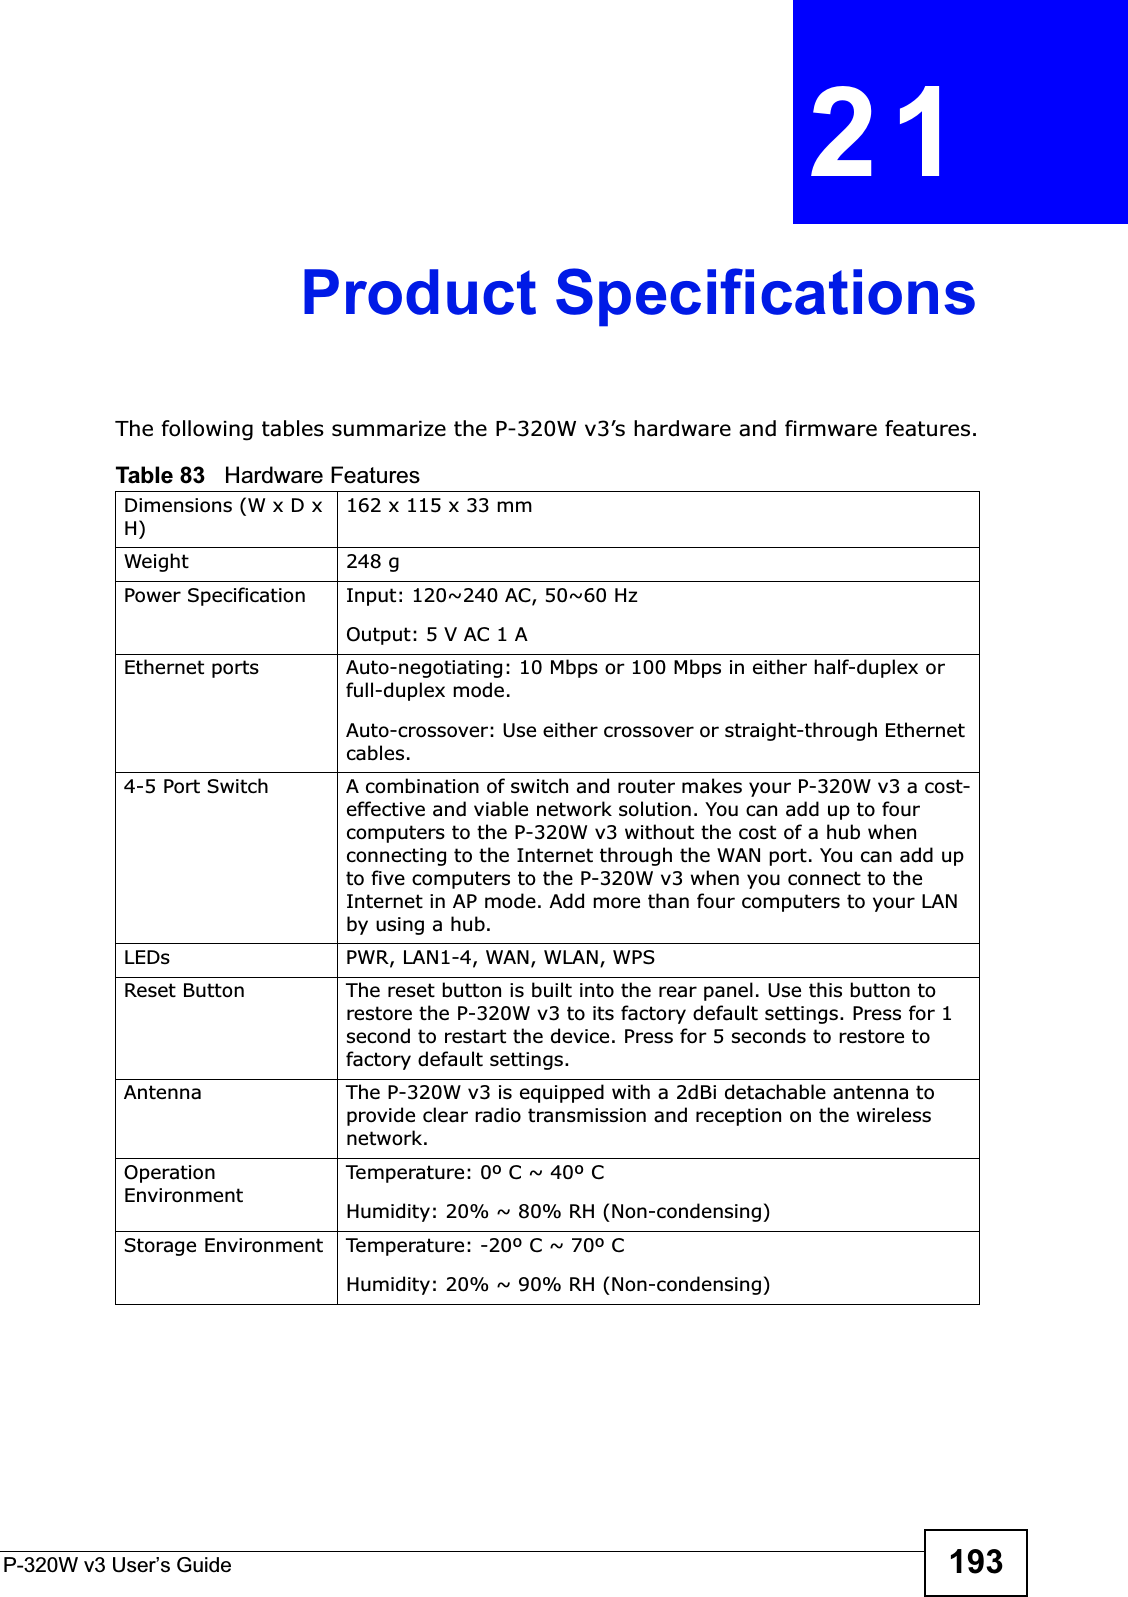 P-320W v3 User’s Guide 193CHAPTER 21Product SpecificationsThe following tables summarize the P-320W v3’s hardware and firmware features.Table 83   Hardware FeaturesDimensions (W x D x H)162 x 115 x 33 mmWeight 248 gPower Specification Input: 120~240 AC, 50~60 HzOutput: 5 V AC 1 AEthernet ports Auto-negotiating: 10 Mbps or 100 Mbps in either half-duplex or full-duplex mode.Auto-crossover: Use either crossover or straight-through Ethernet cables.4-5 Port Switch A combination of switch and router makes your P-320W v3 a cost-effective and viable network solution. You can add up to four computers to the P-320W v3 without the cost of a hub when connecting to the Internet through the WAN port. You can add up to five computers to the P-320W v3 when you connect to the Internet in AP mode. Add more than four computers to your LAN by using a hub.LEDs PWR, LAN1-4, WAN, WLAN, WPSReset Button The reset button is built into the rear panel. Use this button to restore the P-320W v3 to its factory default settings. Press for 1 second to restart the device. Press for 5 seconds to restore to factory default settings.Antenna The P-320W v3 is equipped with a 2dBi detachable antenna to provide clear radio transmission and reception on the wireless network. Operation EnvironmentTemperature: 0º C ~ 40º CHumidity: 20% ~ 80% RH (Non-condensing)Storage Environment Temperature: -20º C ~ 70º CHumidity: 20% ~ 90% RH (Non-condensing)